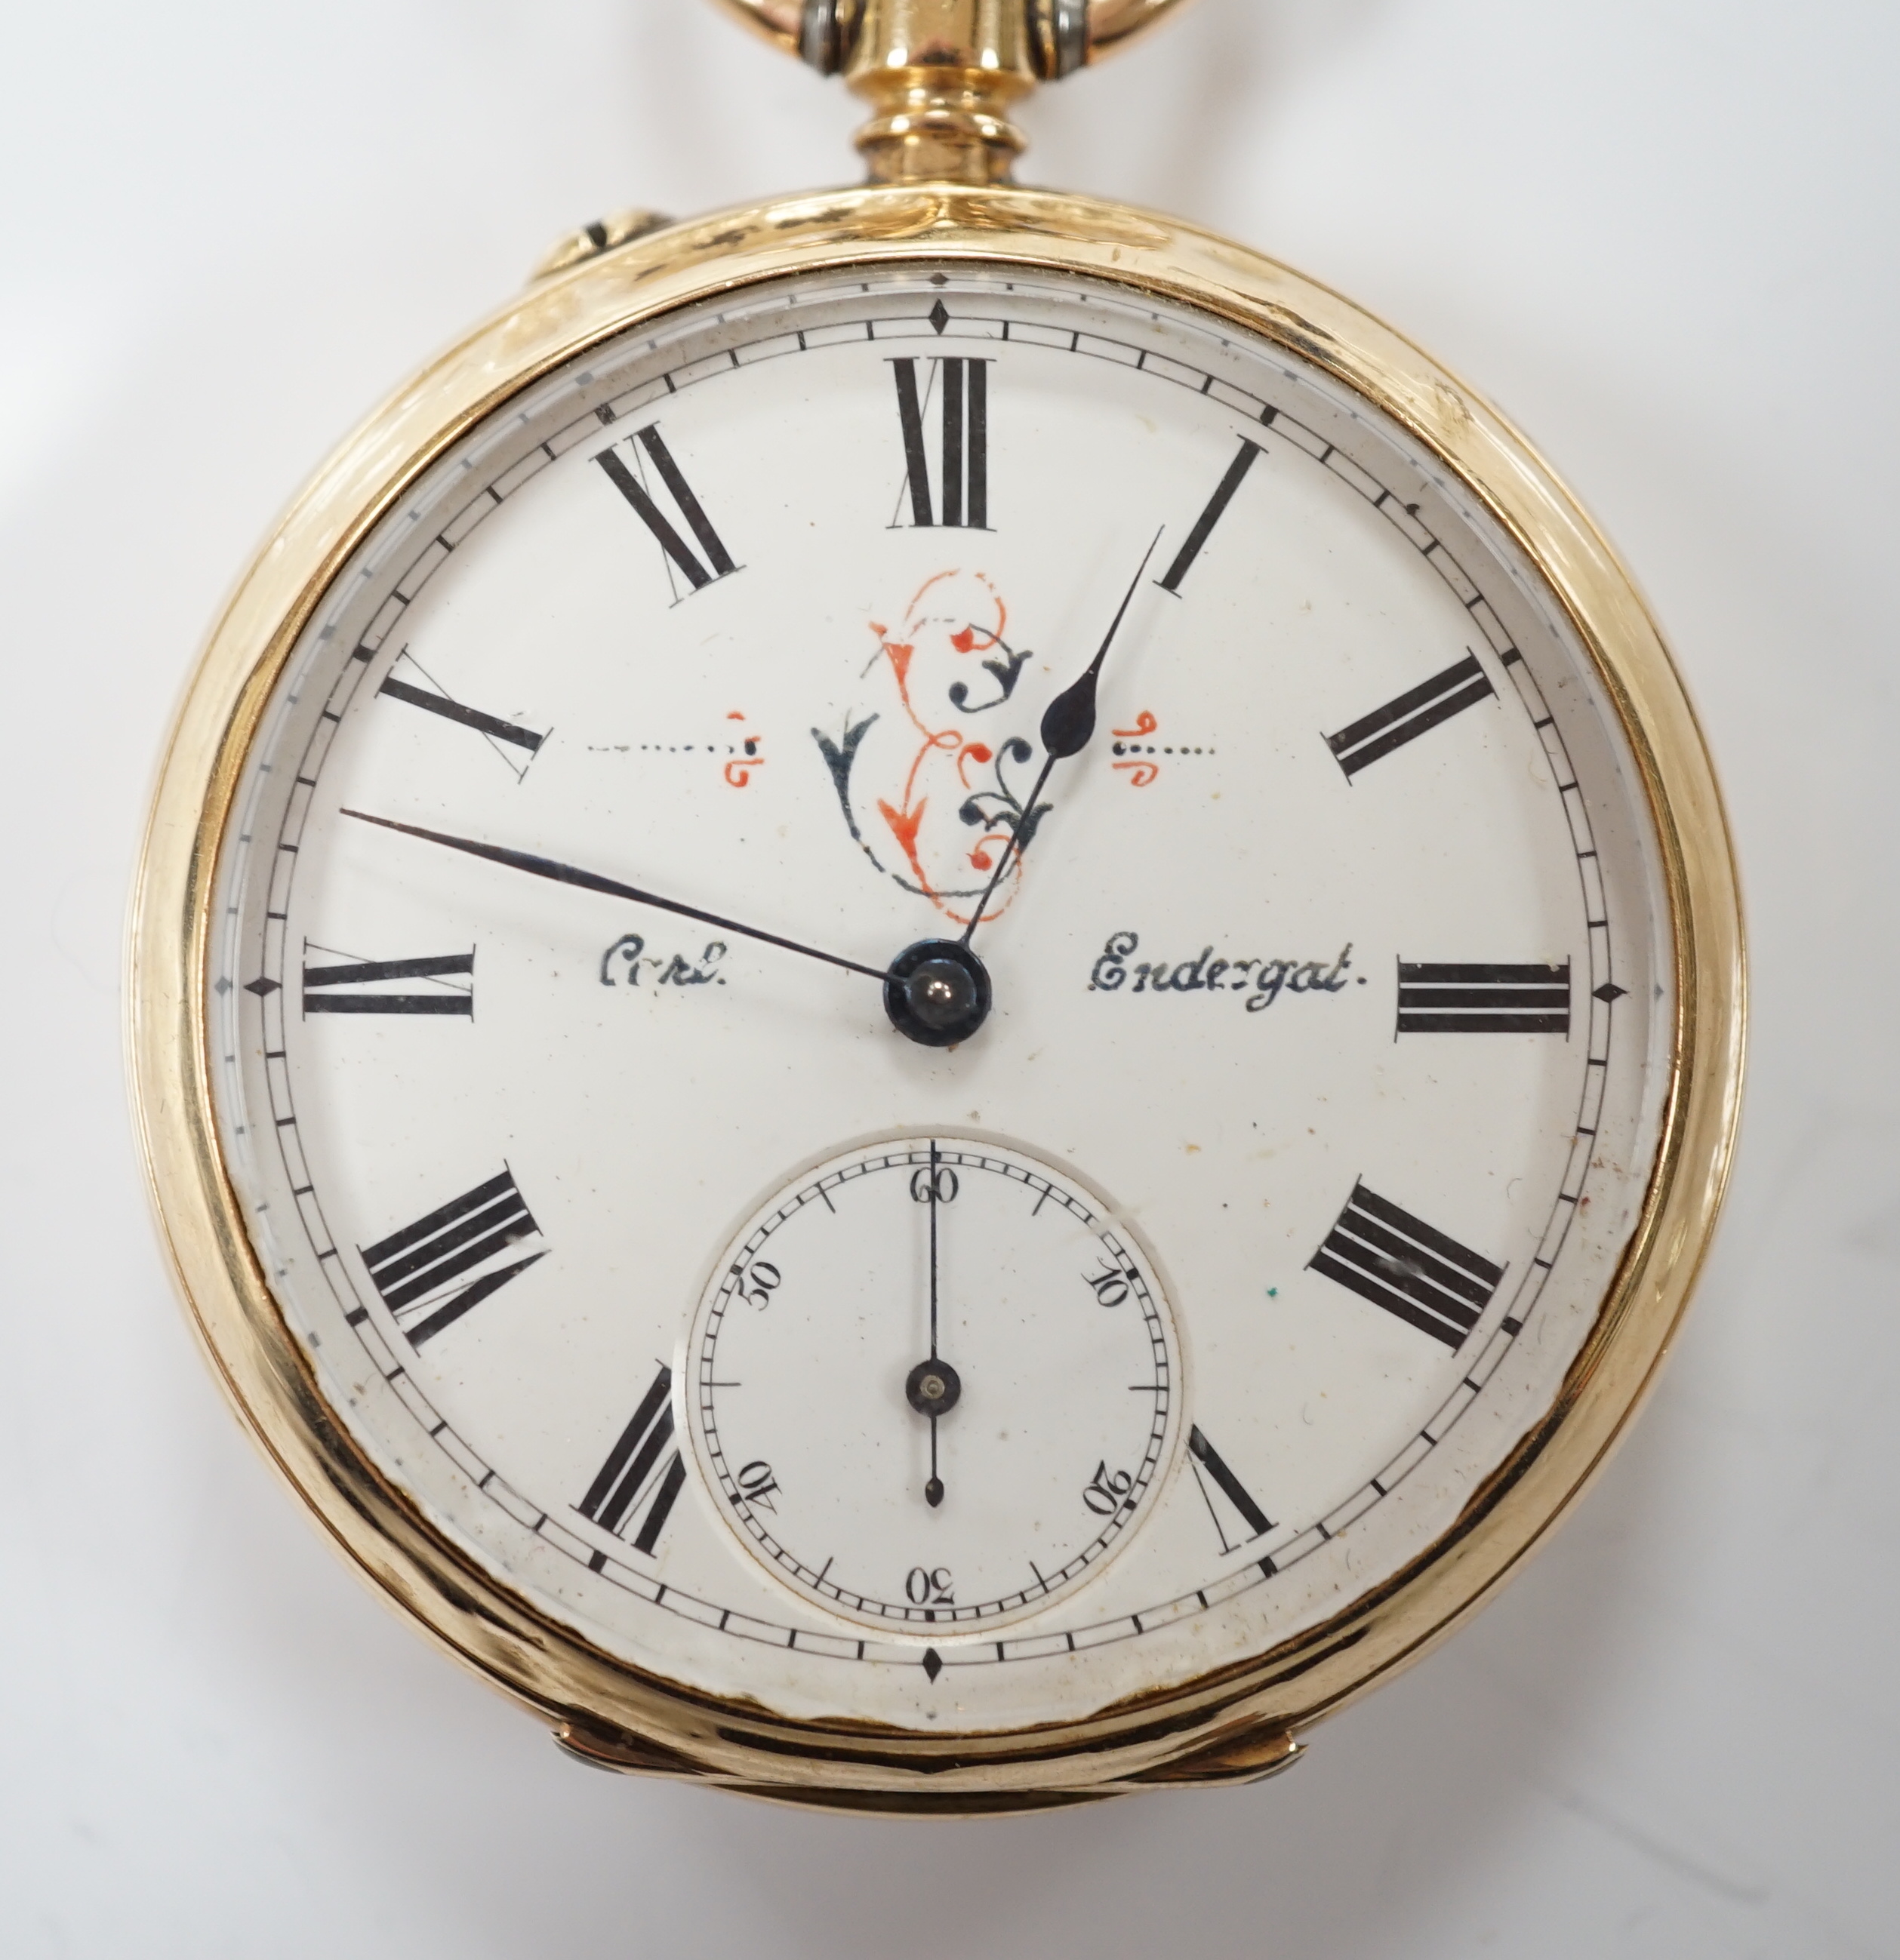 A Swiss 14k open face keyless pocket watch, with Roman dial and subsidiary seconds, case diameter 47mm, gross weight 85.2 grams.